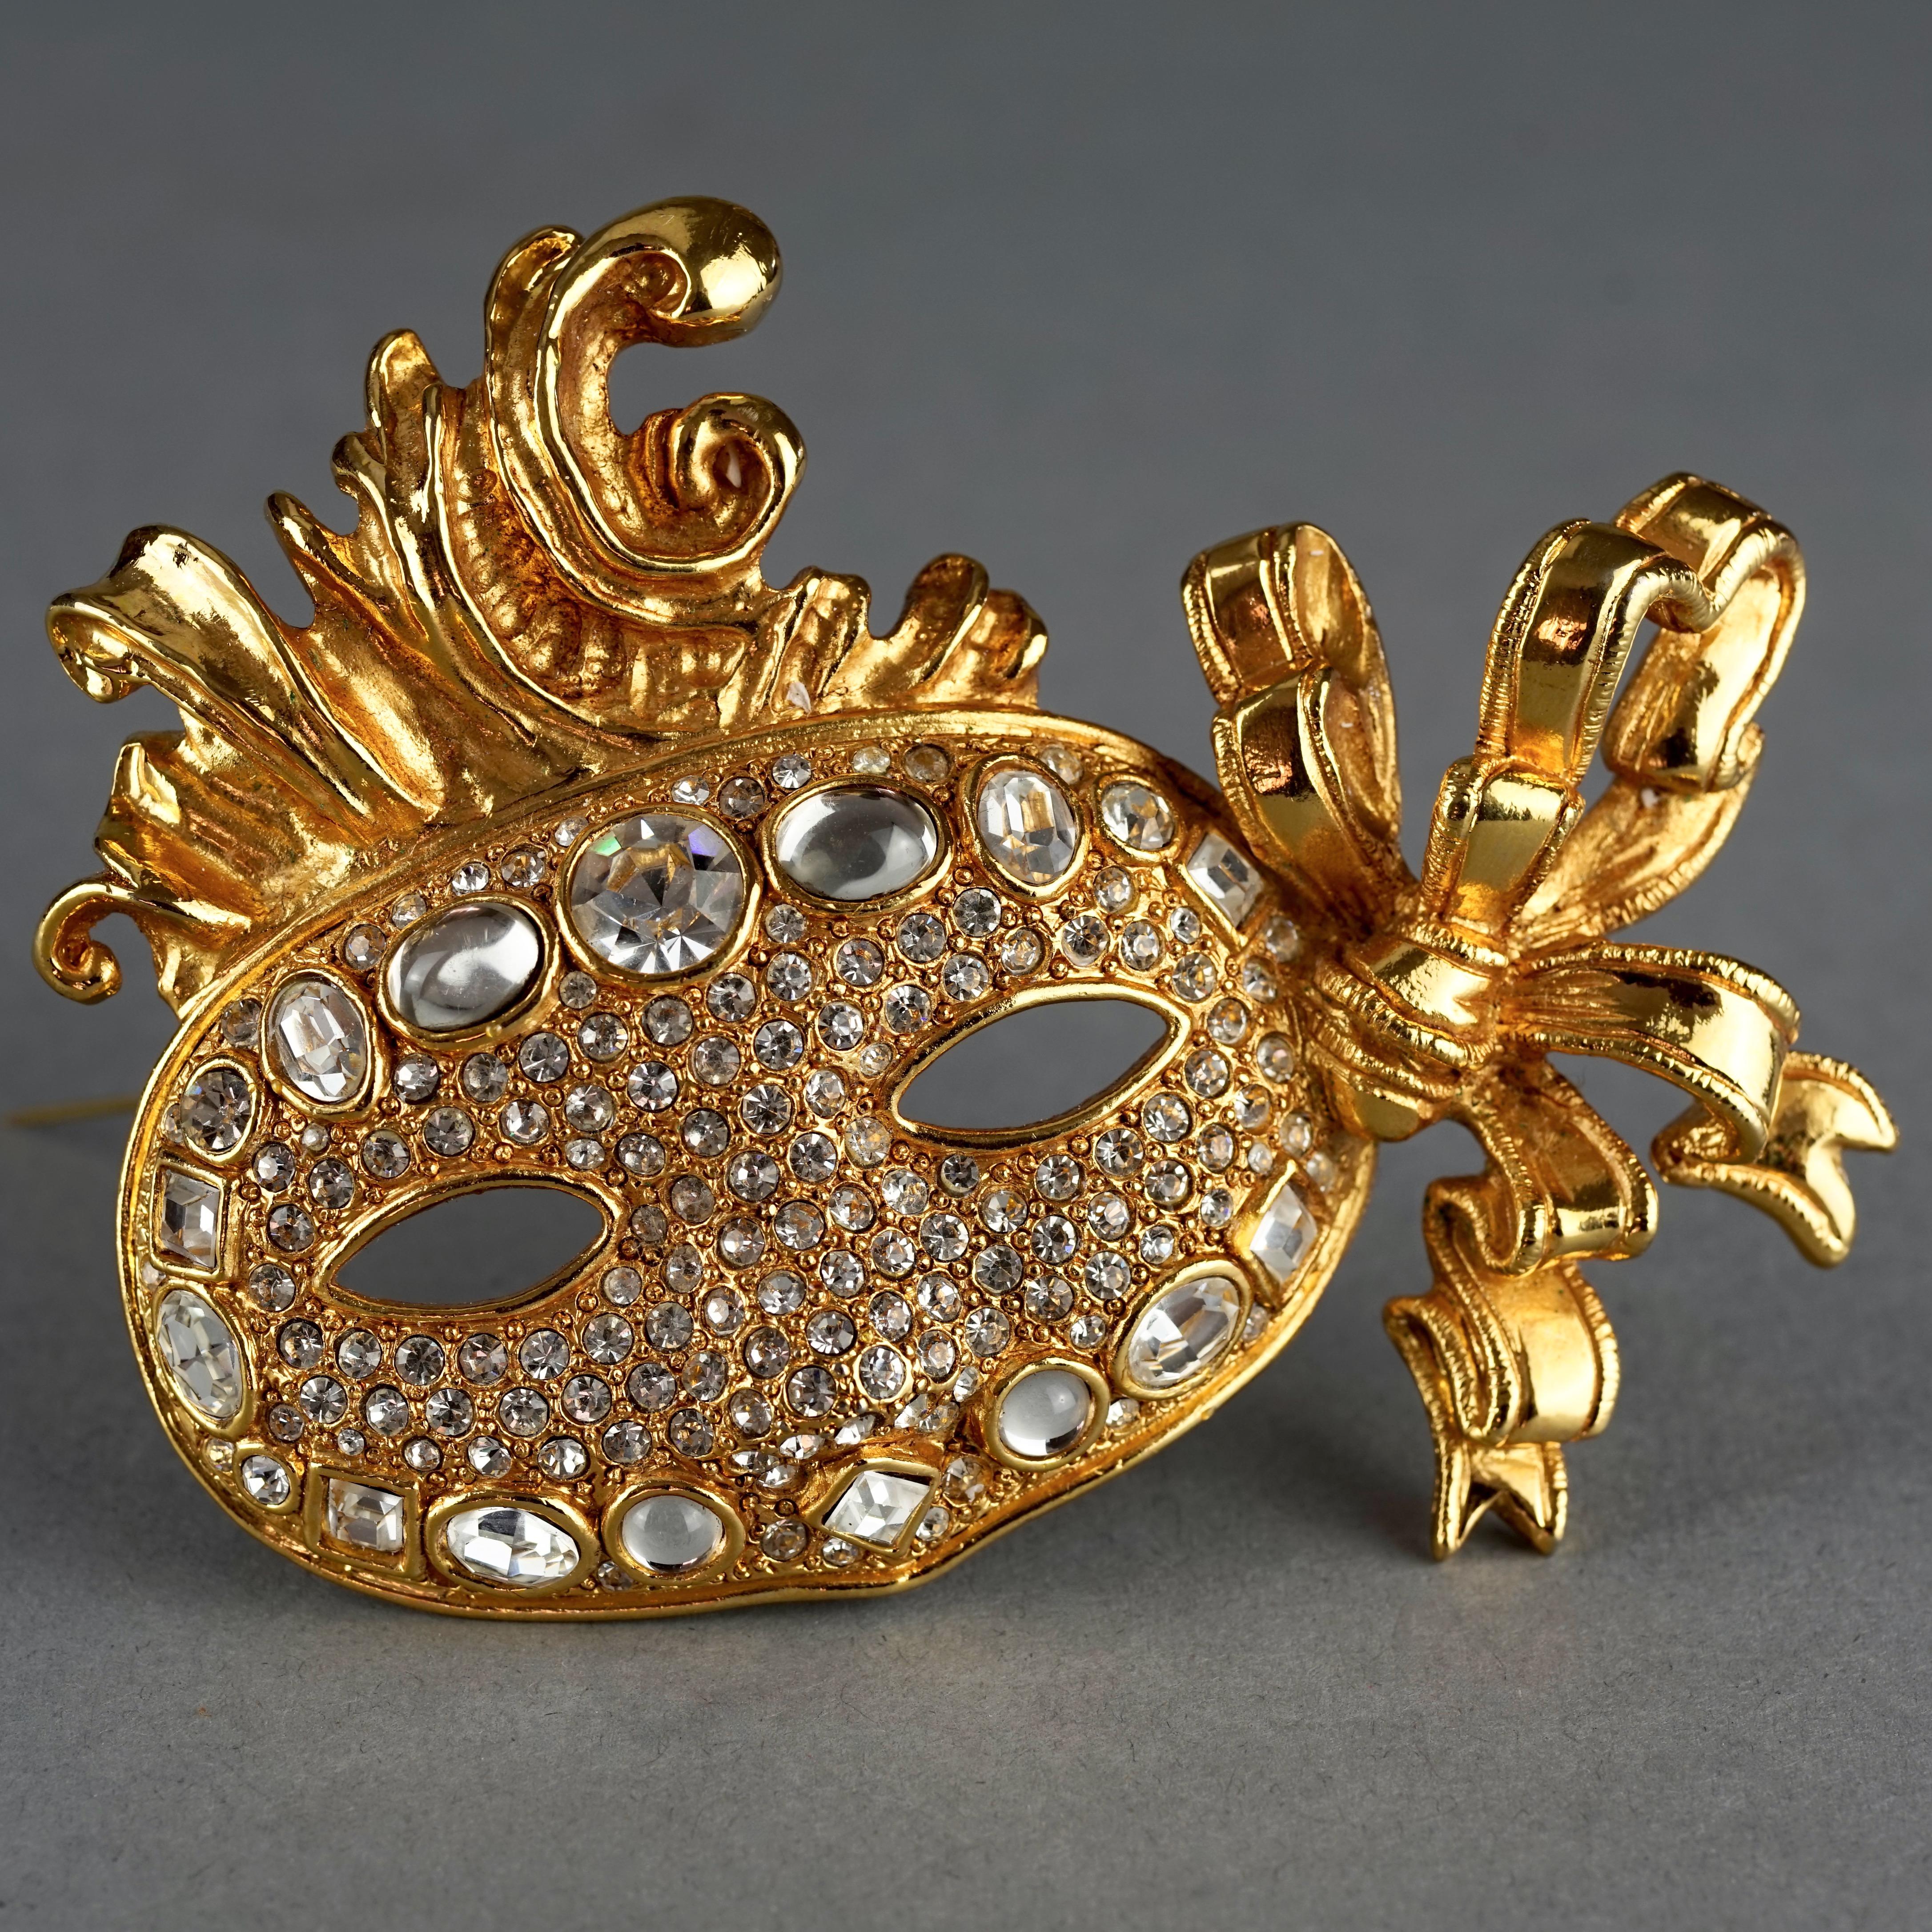 Vintage CHRISTIAN DIOR BOUTIQUE Jewelled Masquerade Massive Brooch In Excellent Condition For Sale In Kingersheim, Alsace